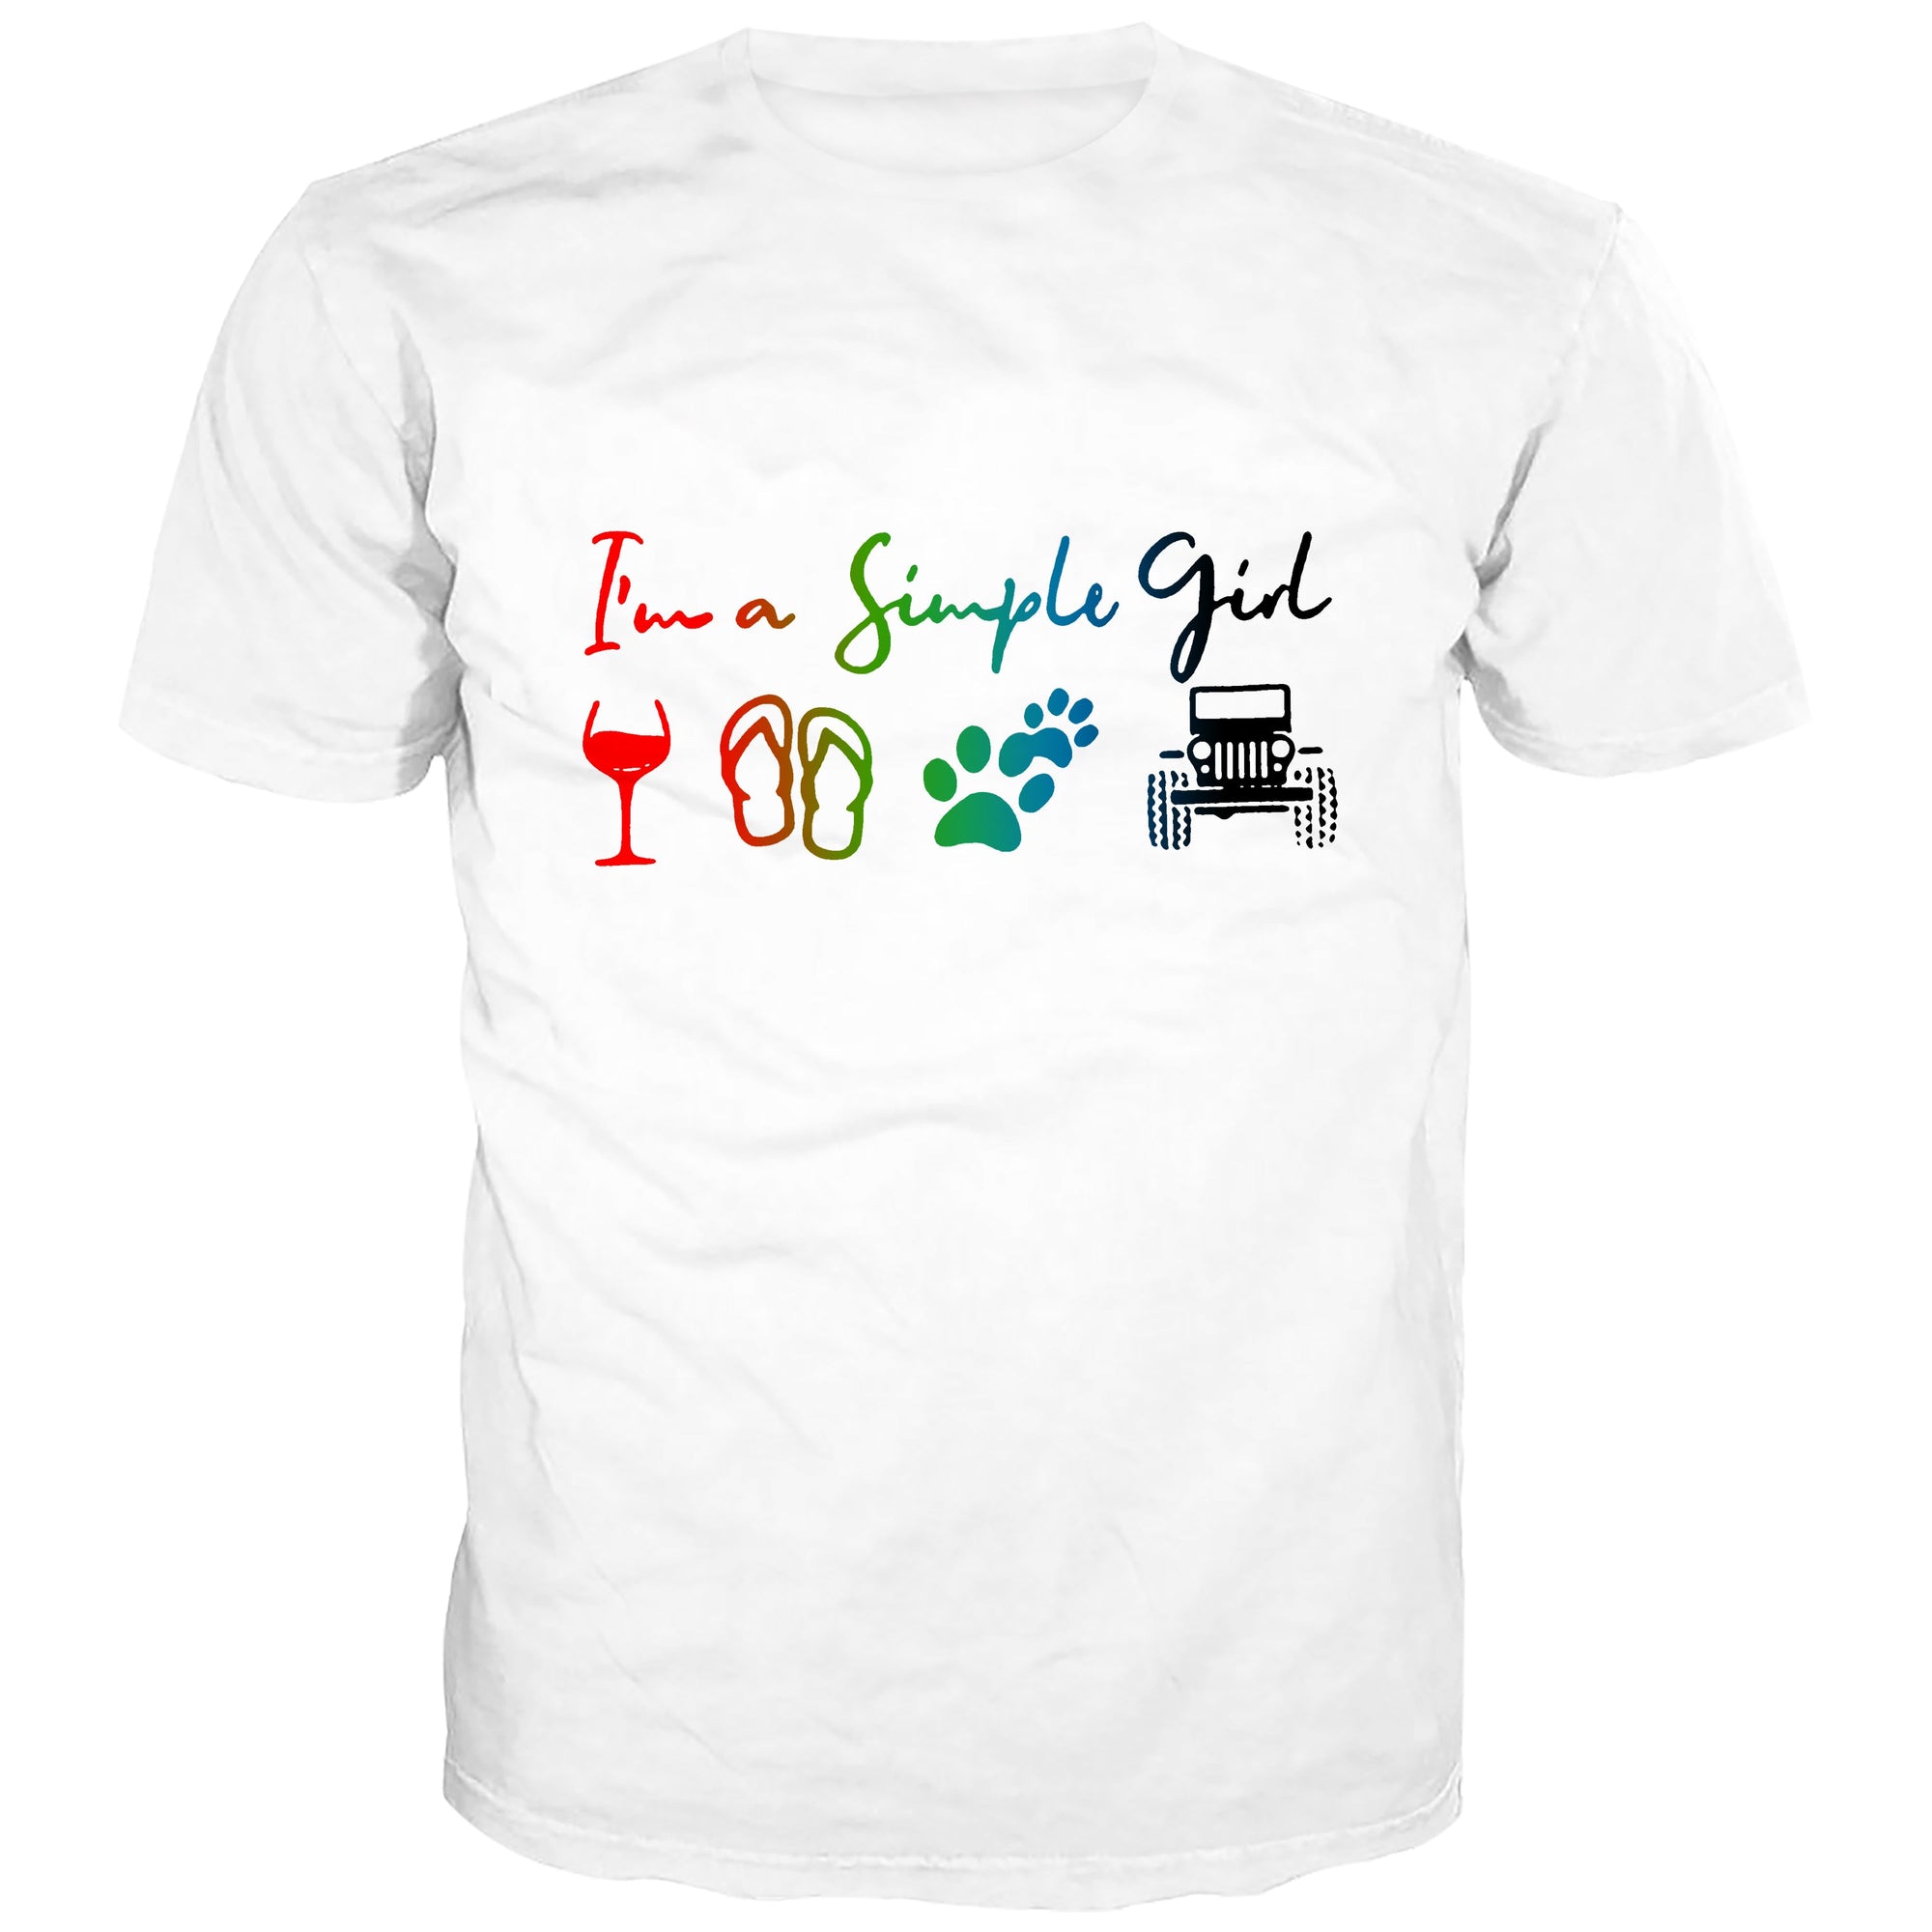 I'm a Simple Girl - Multi Color T-Shirt